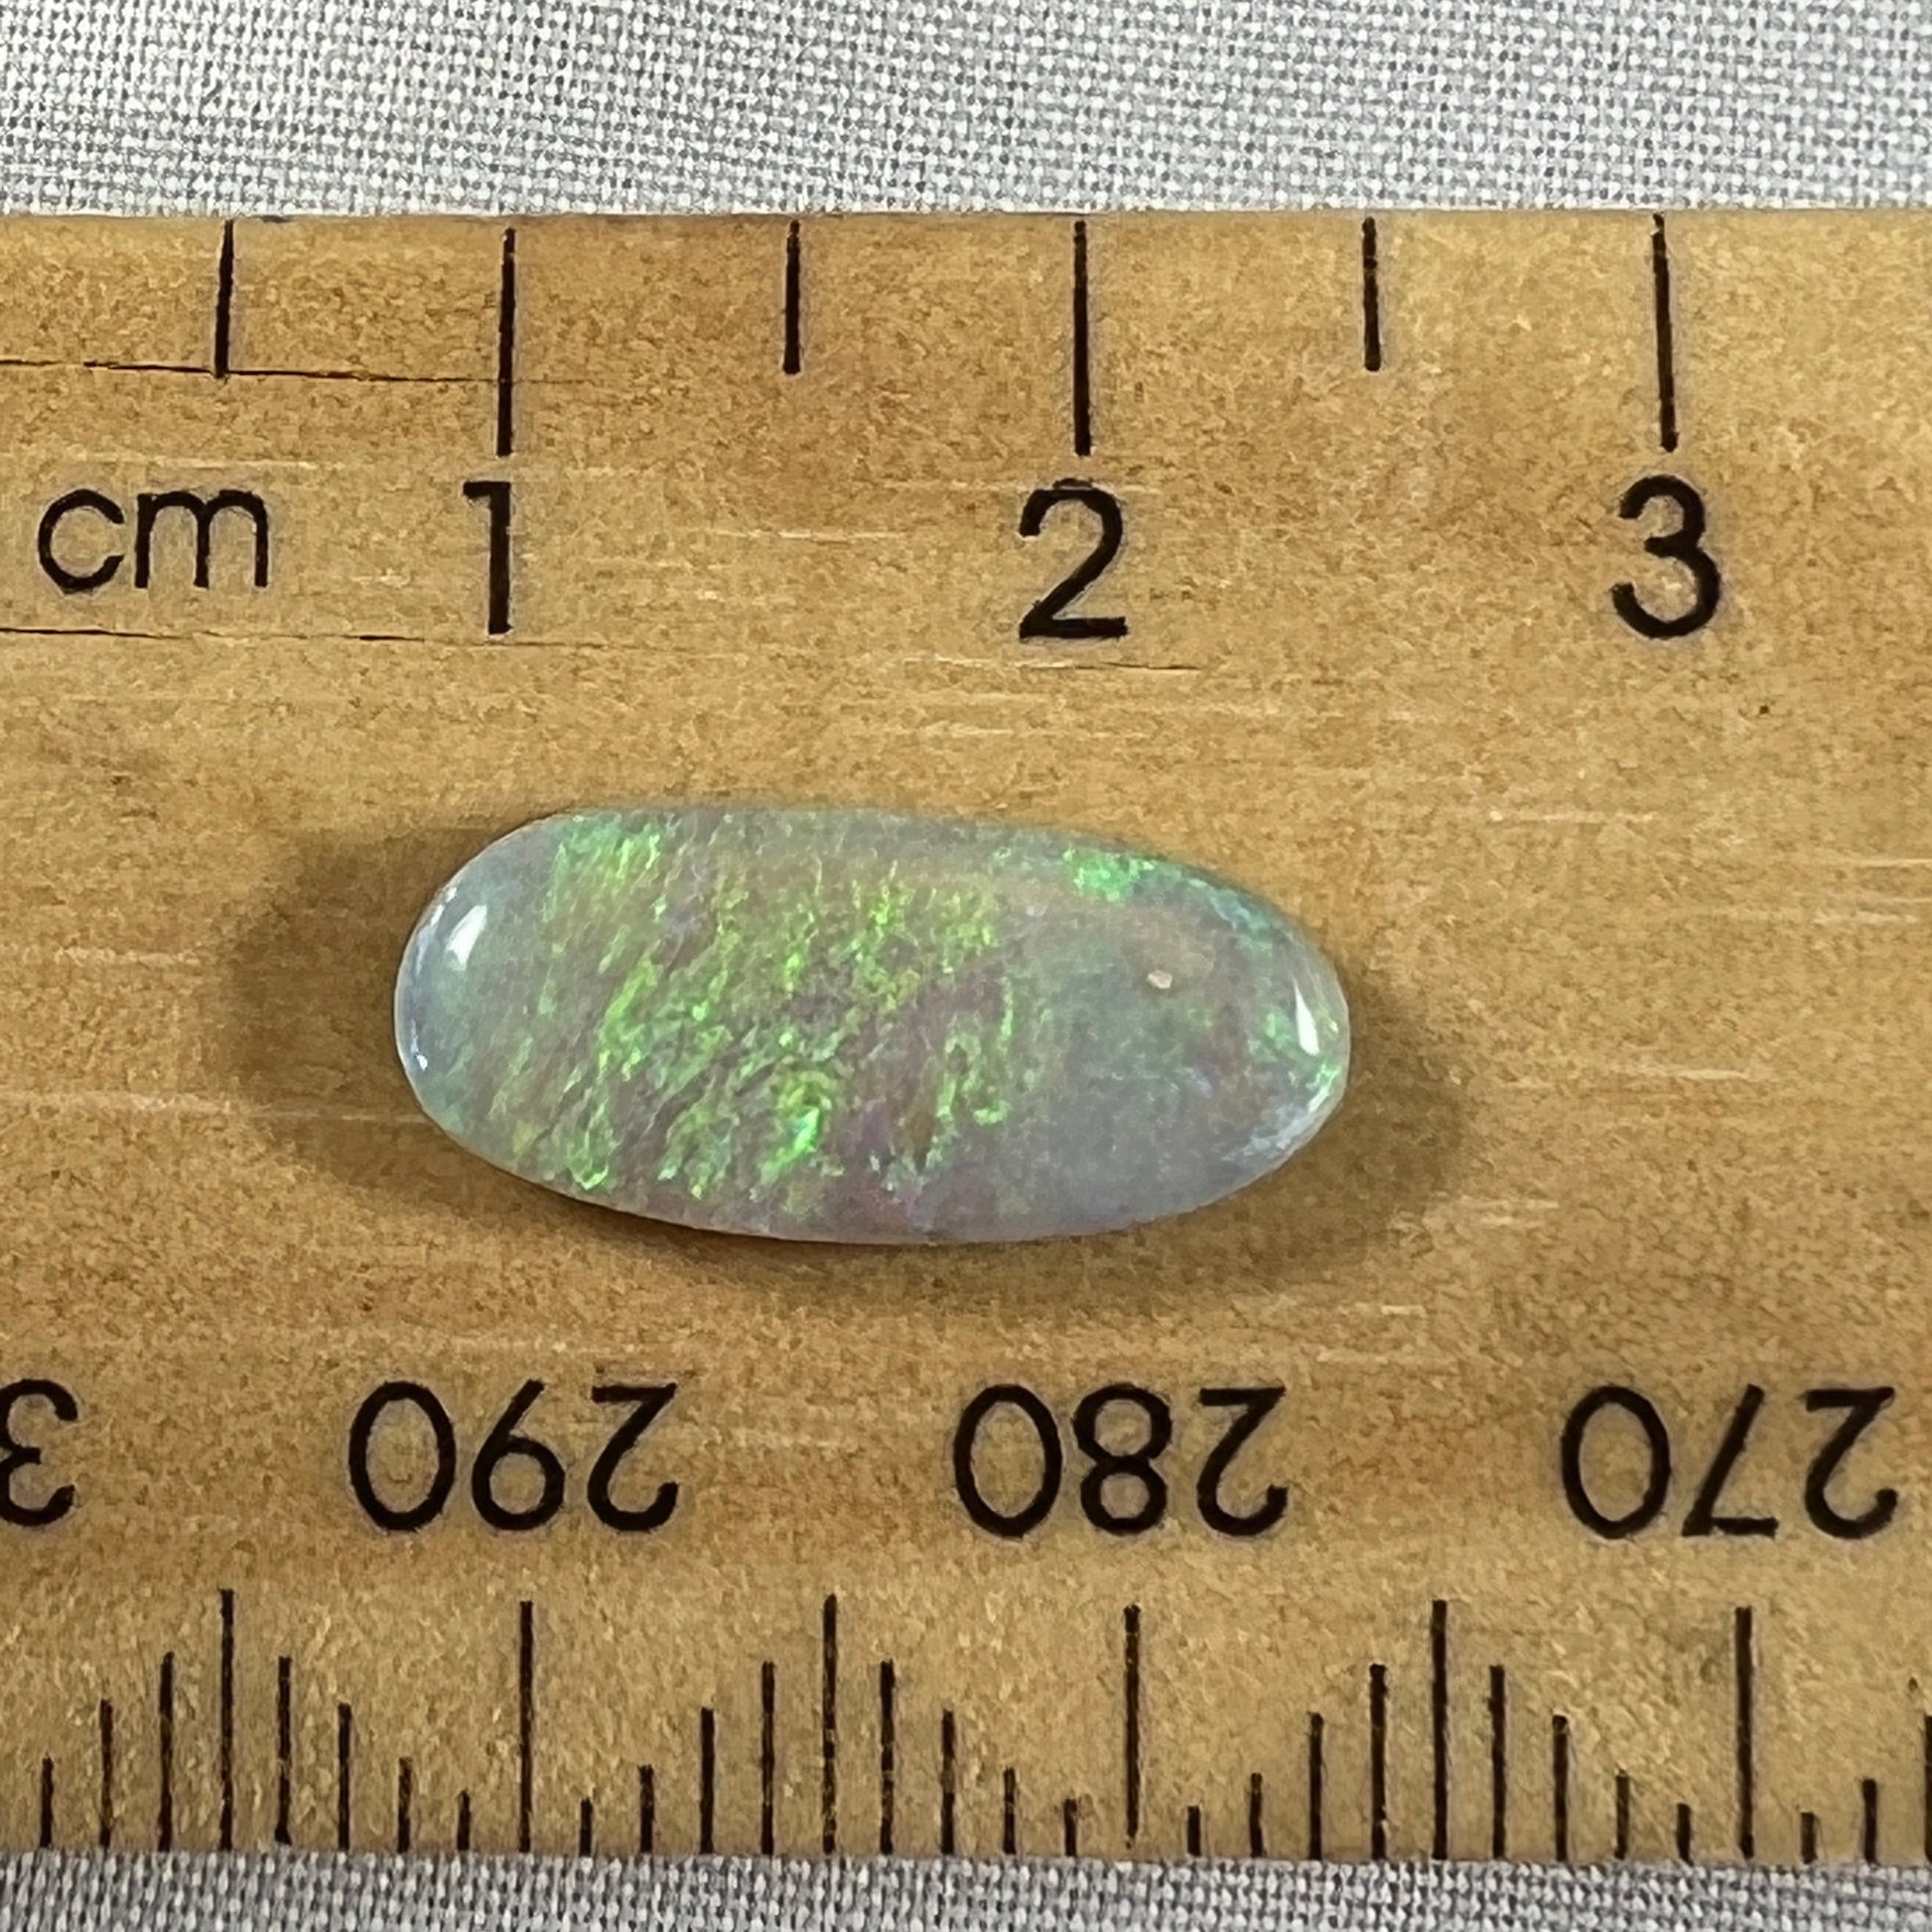 Lightning Ridge grey/green solid opal. Slight sand spot, should rub out, hence the discounted price.